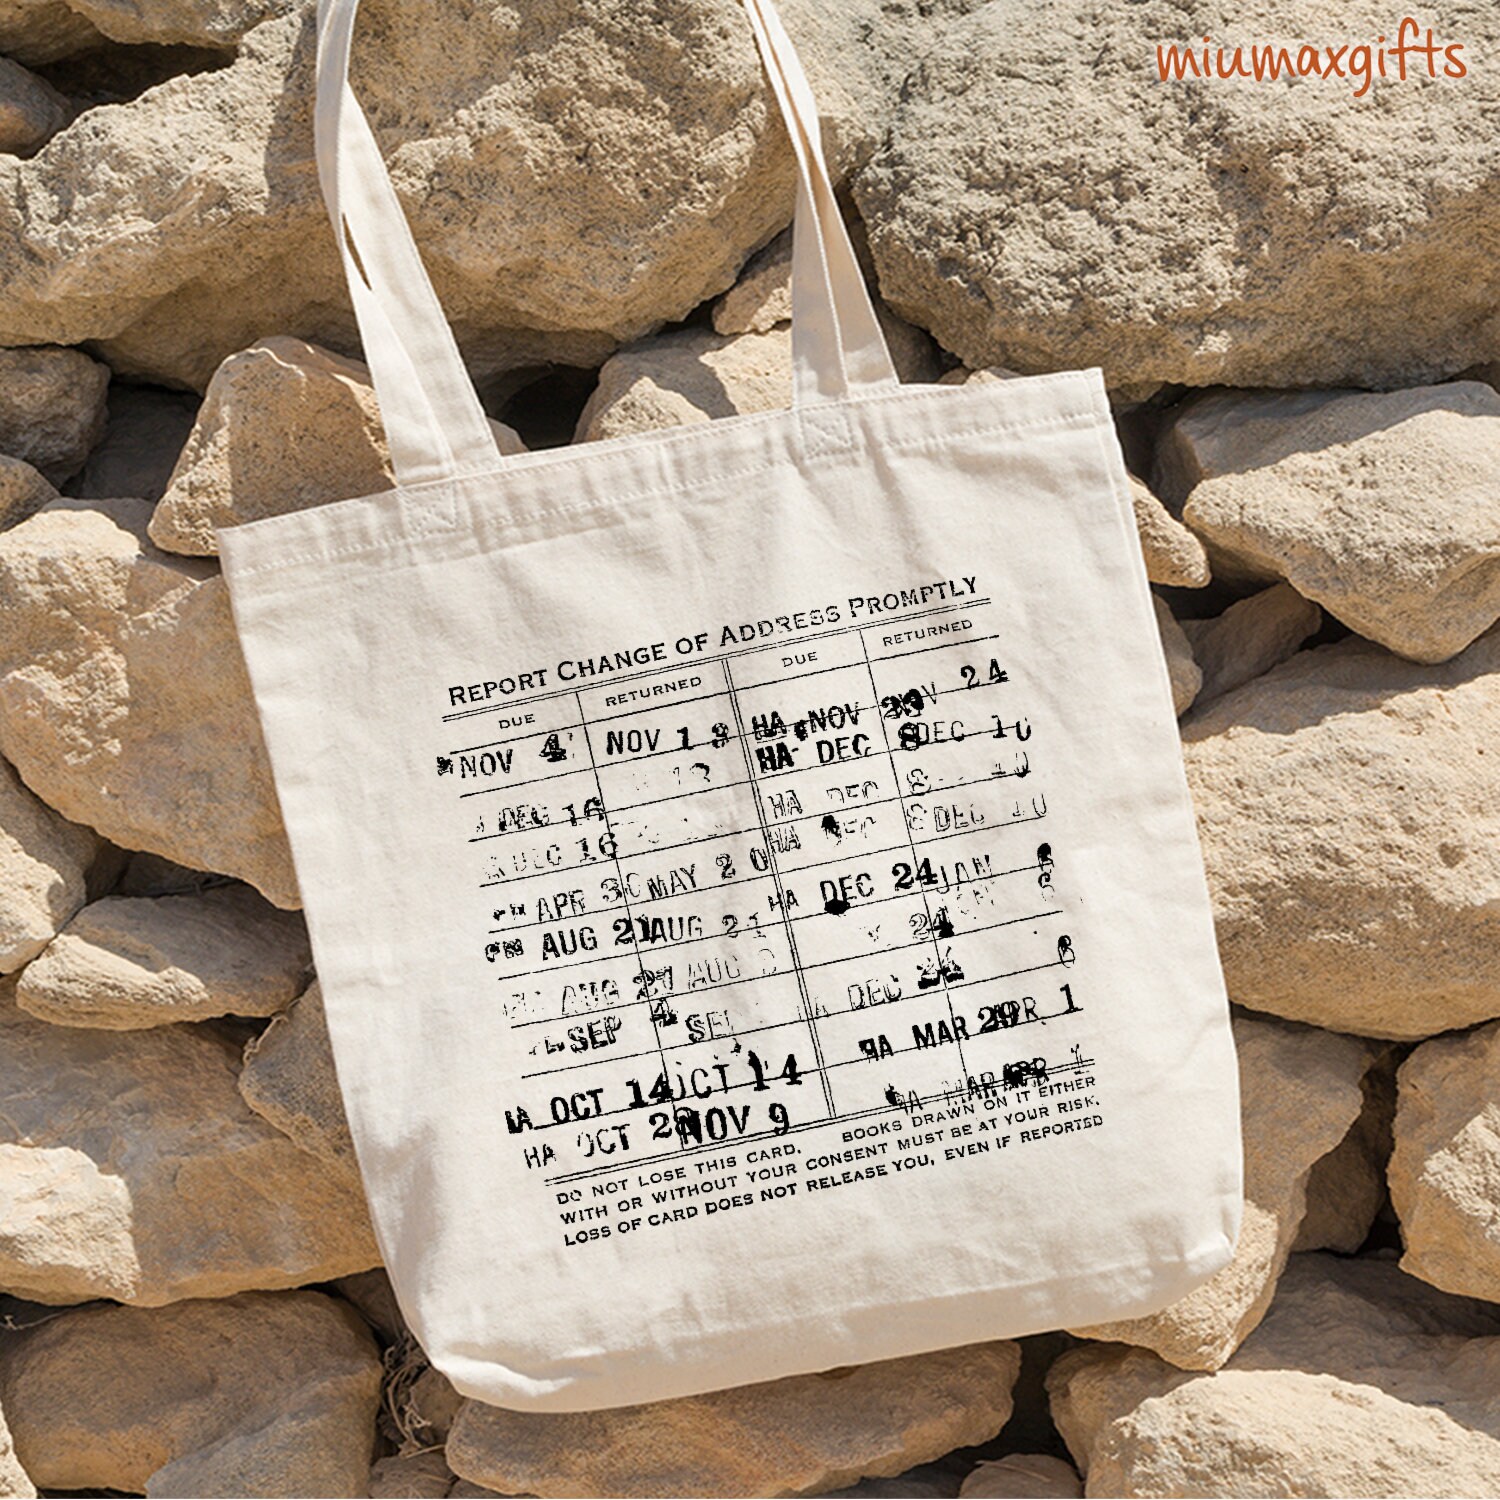 library tote bag, library return card value book bag